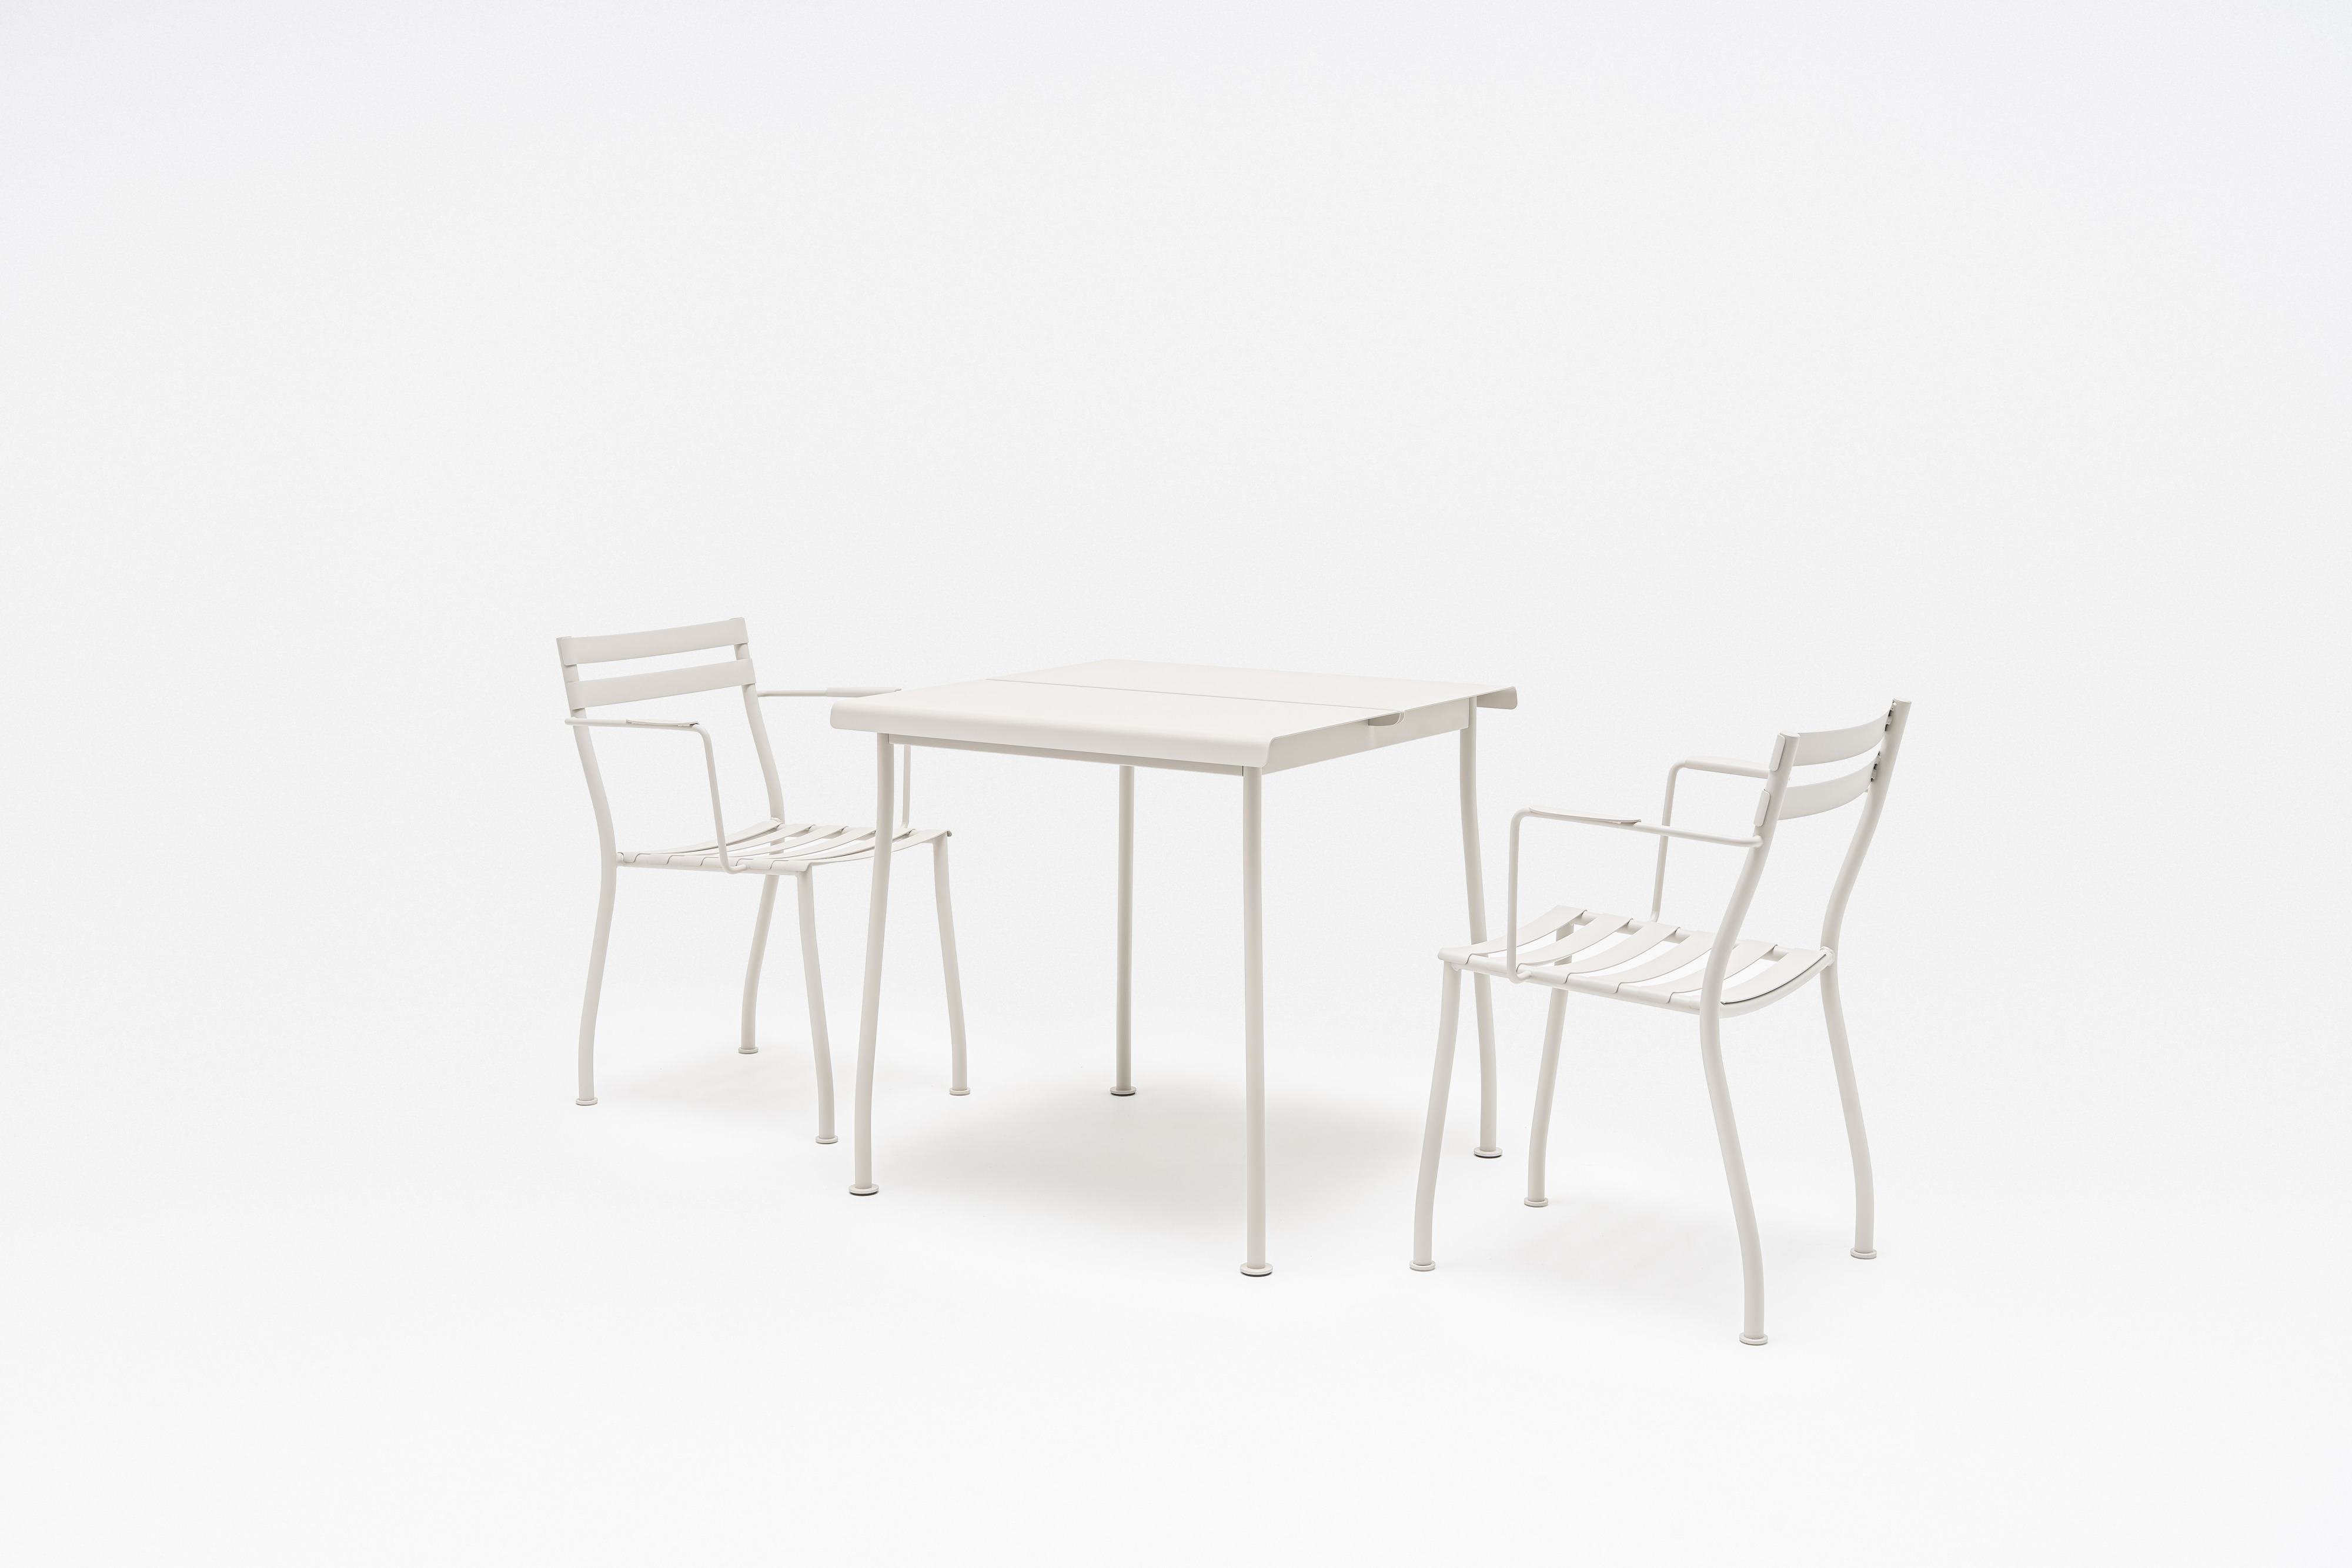 New products: outdoor furniture